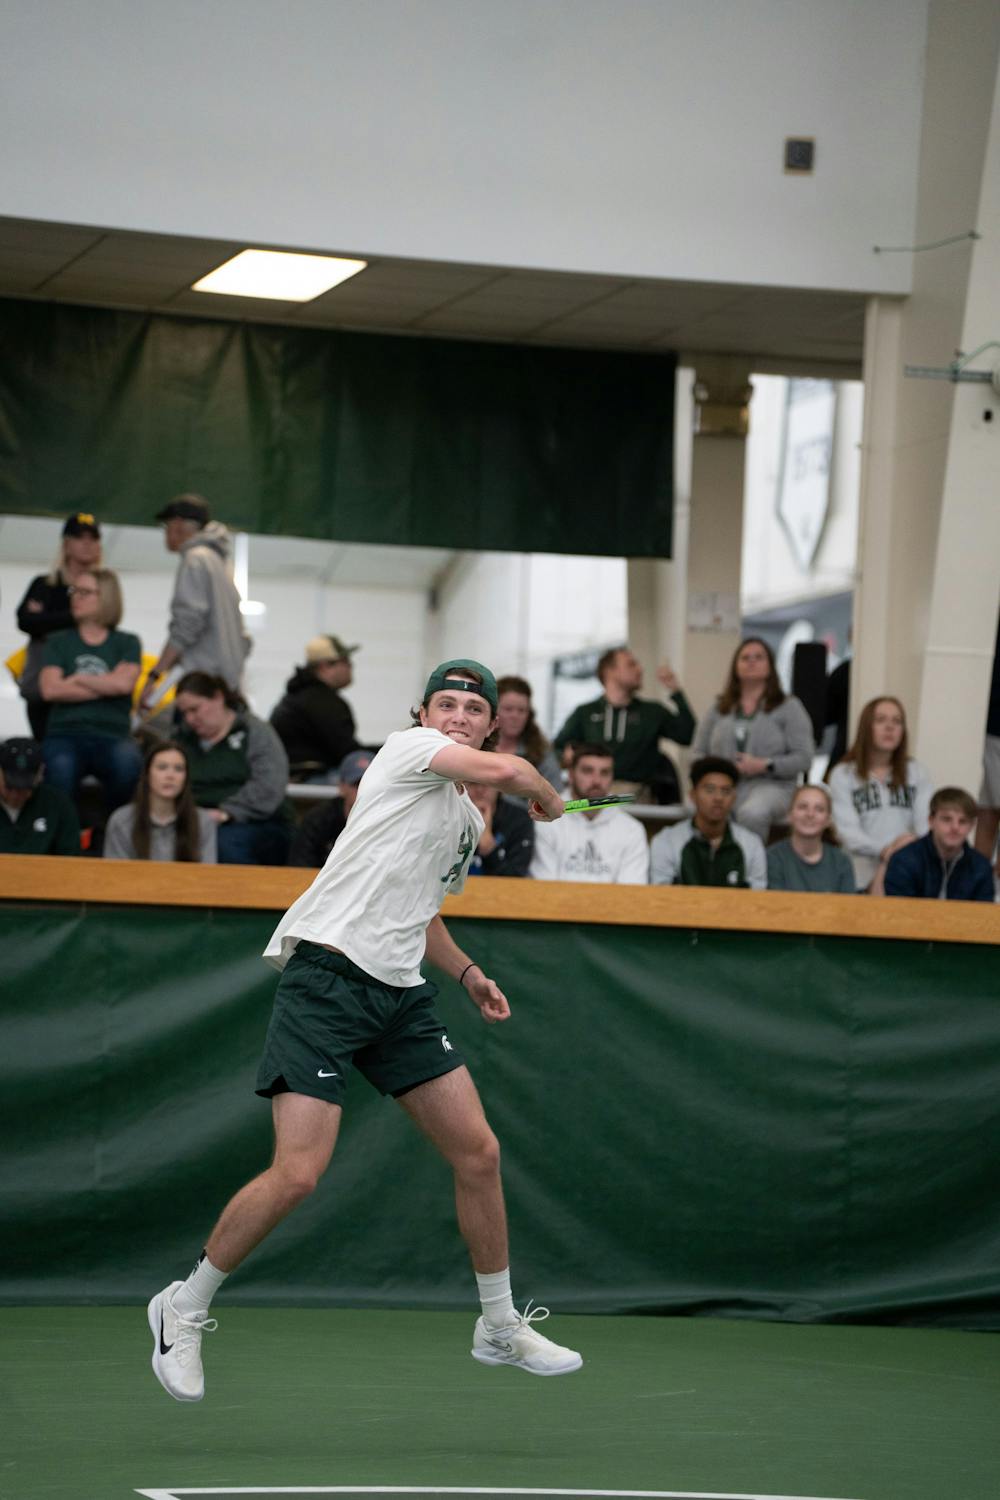 <p>Junior Luke Baylis returns a ball during his singles match against Michigan's junior Gavin Young at the MSU Tennis Center on March 30, 2023. The Spartans lost to the Wolverines 6-1.</p>